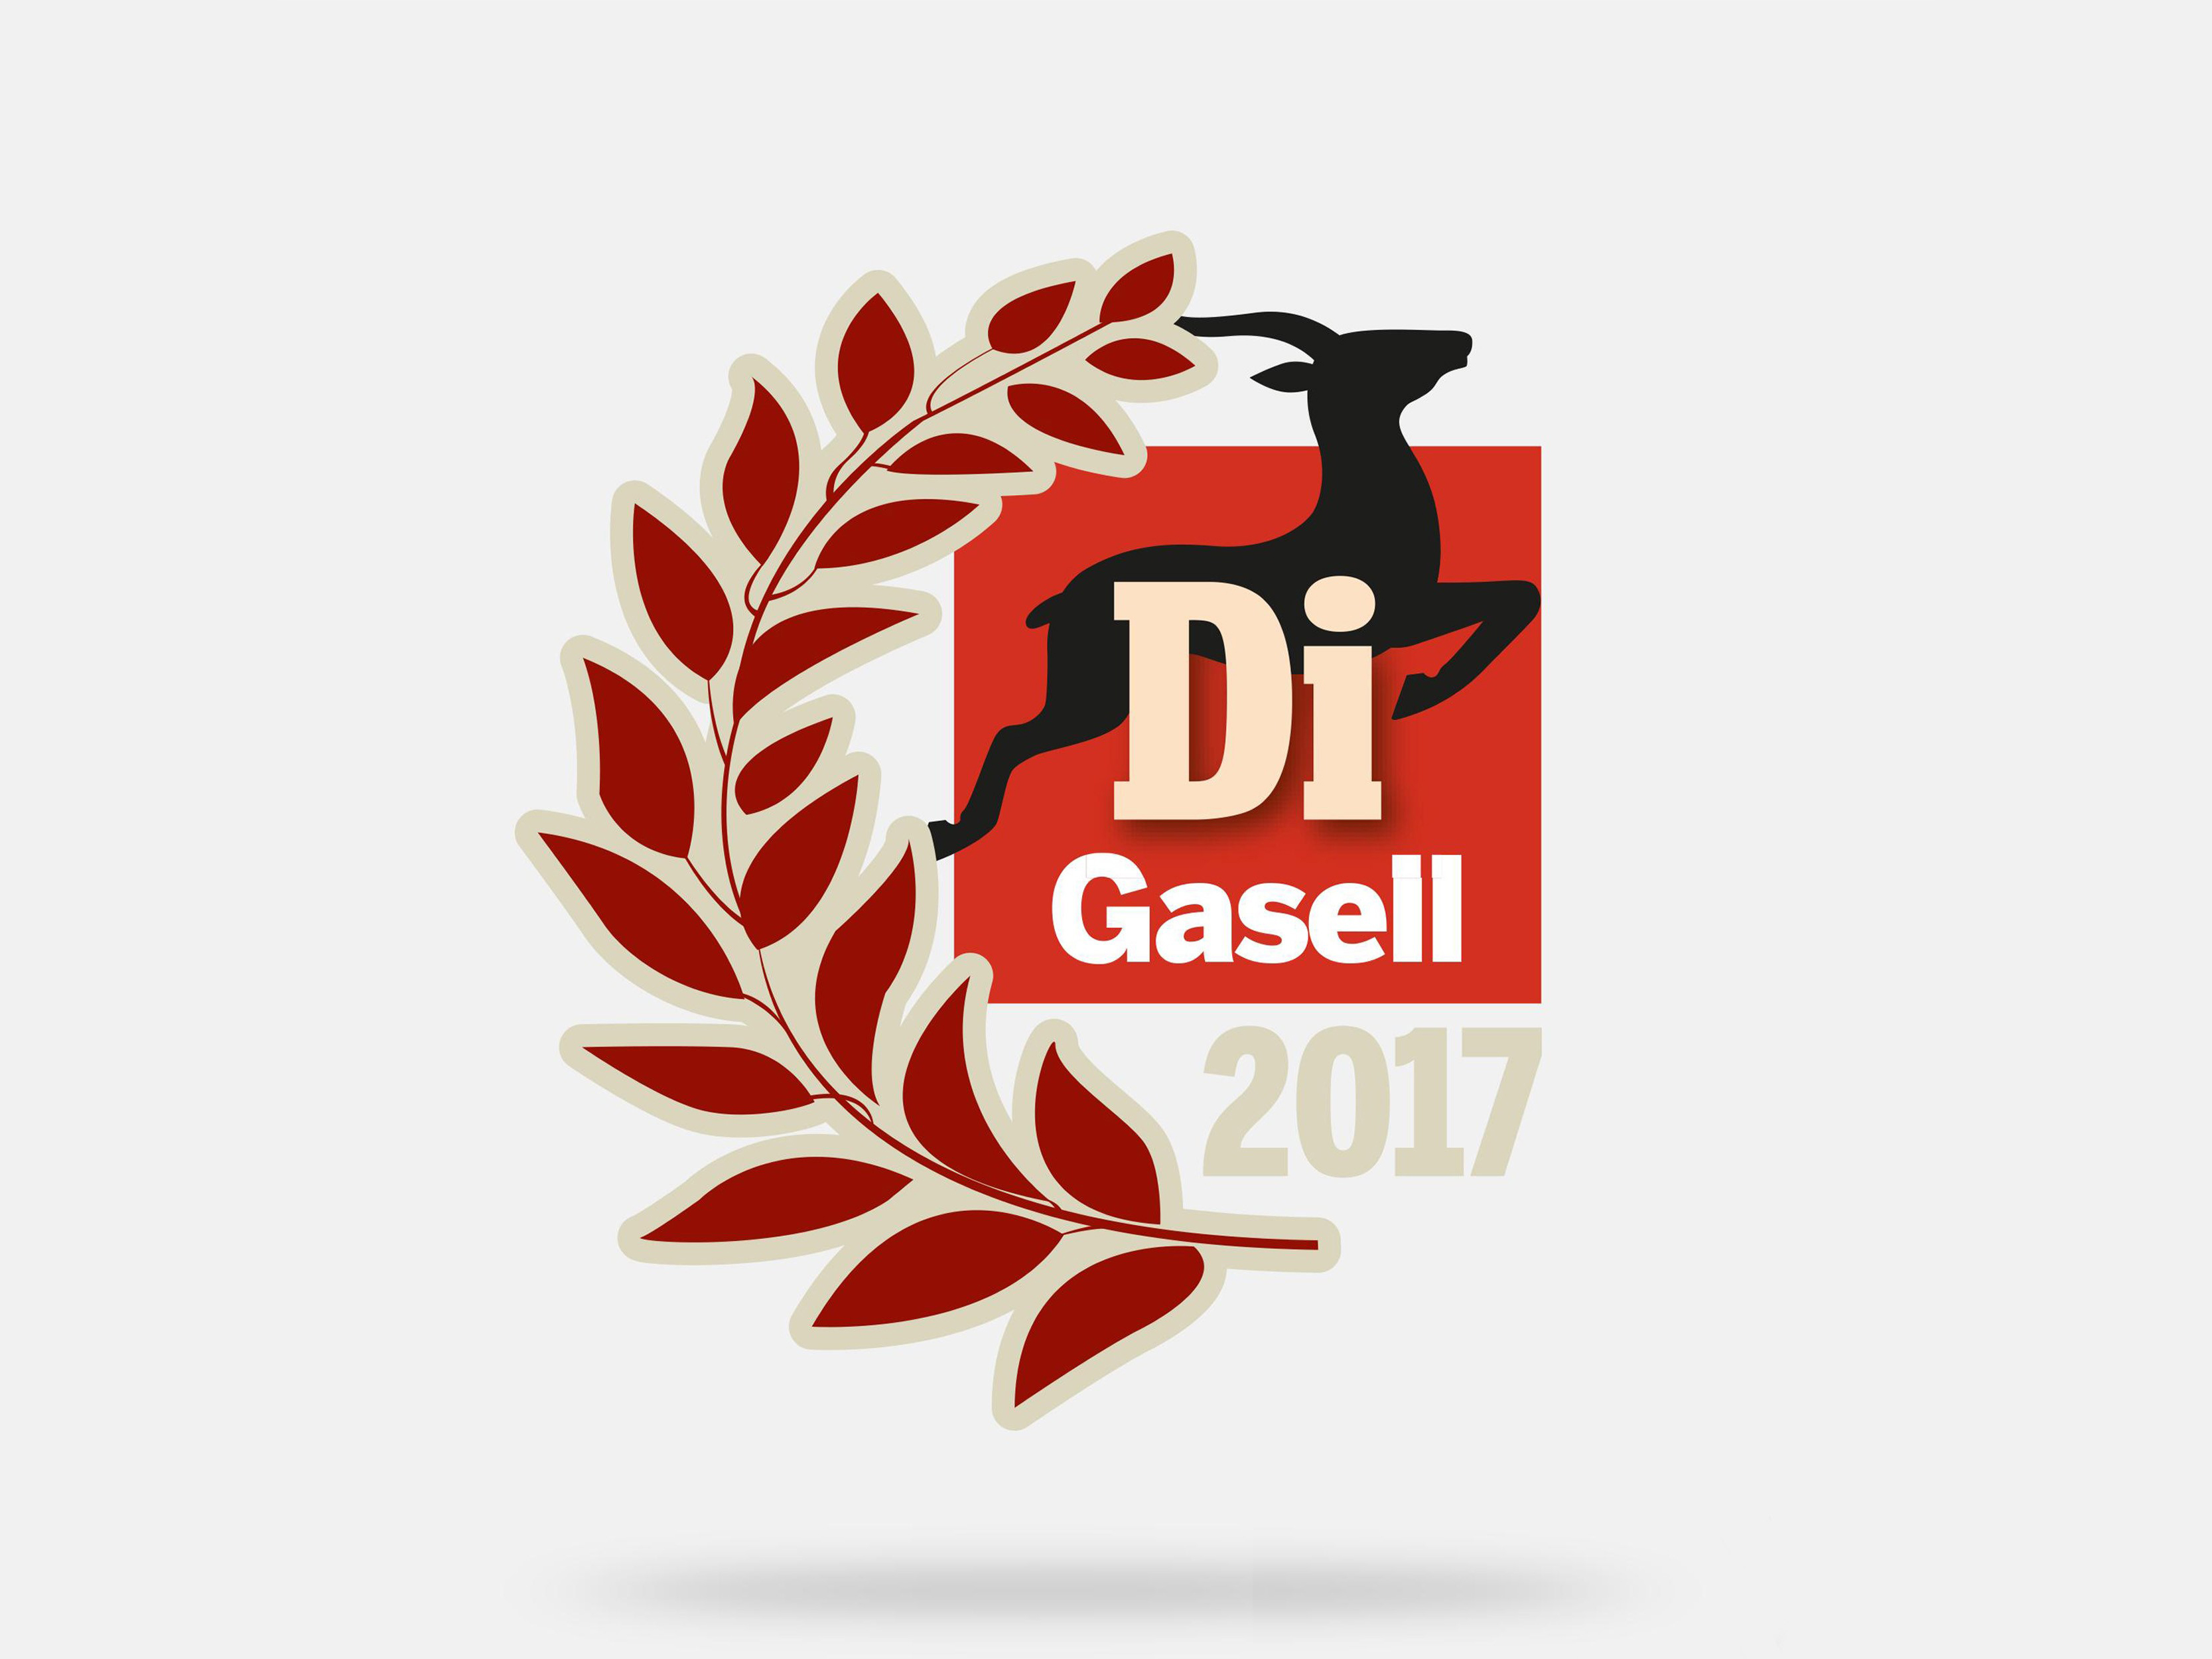 Gasell-4x3